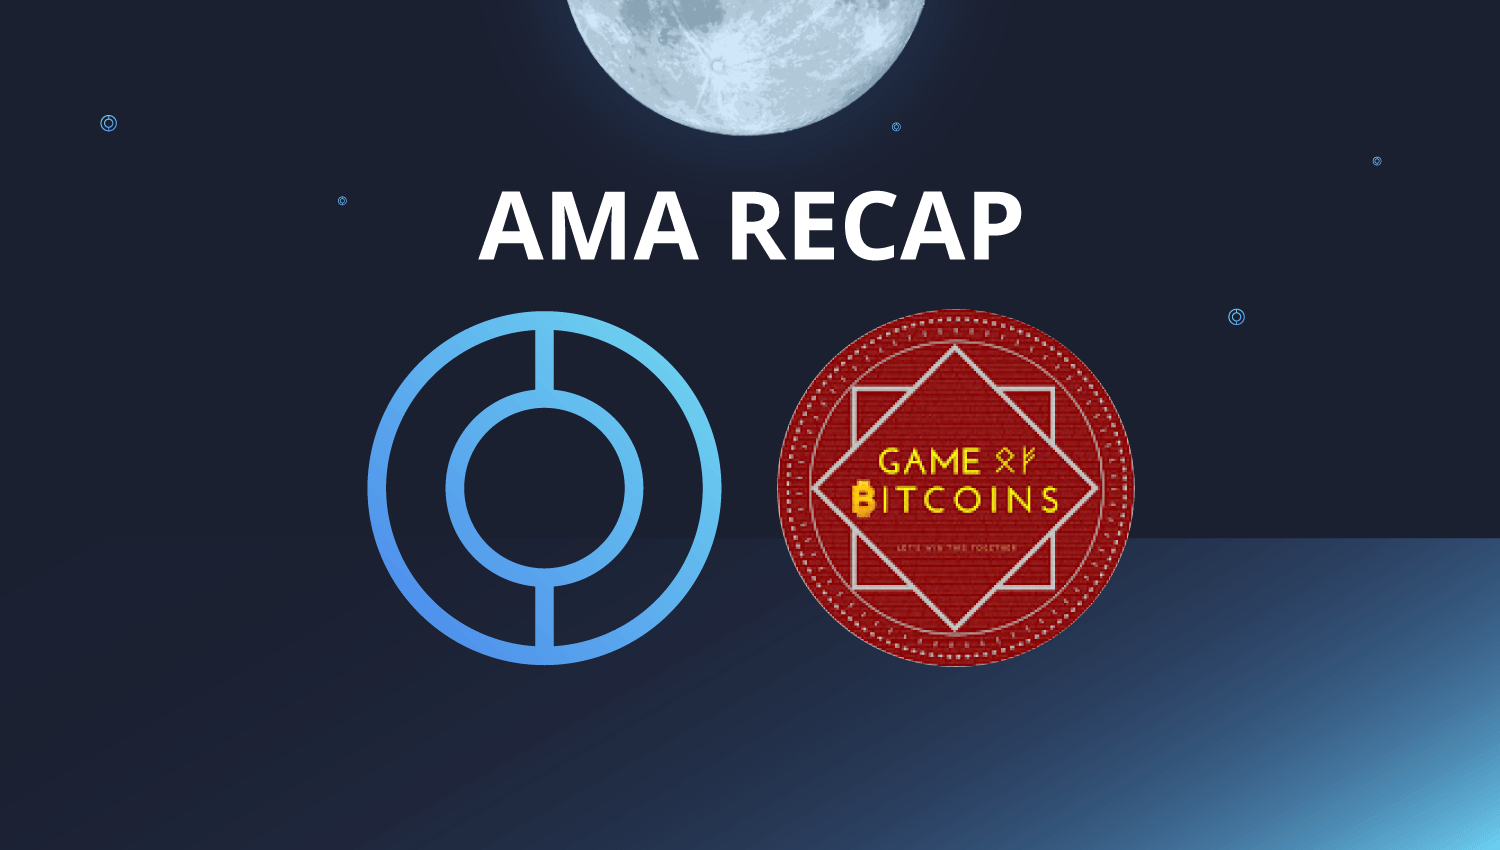 Your questions answered – Game of Bitcoins AMA detailed summary